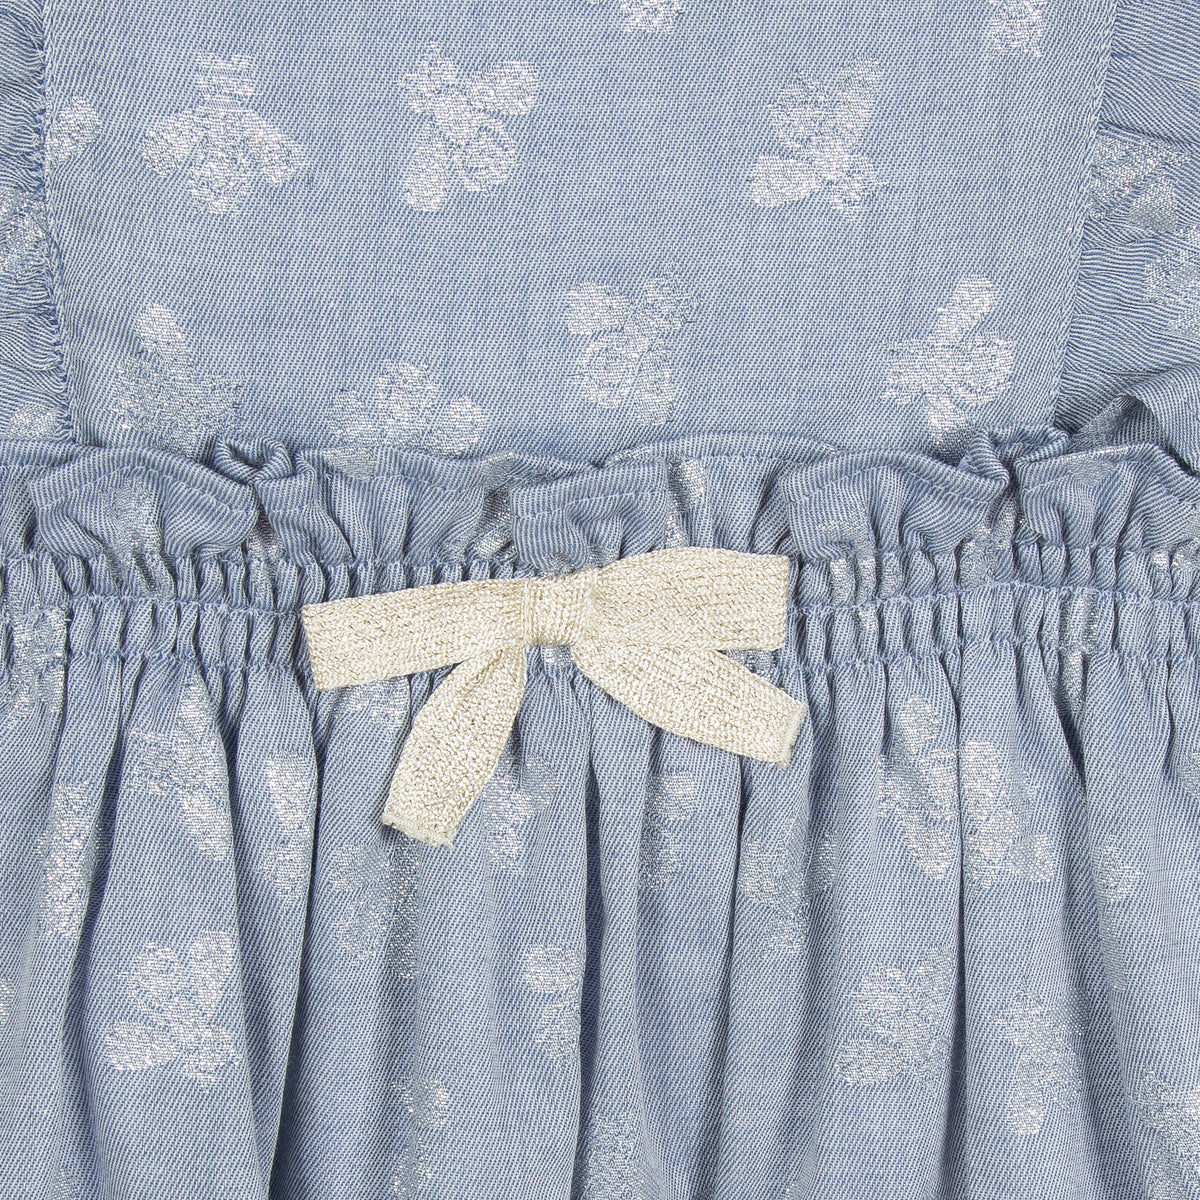 Jean Bourget light blue chambray dress is adorned with silver lurex bees in all over. The silhouette is animated with bands fluttering on the sides at the front and in the back. The skirt is pleated and the waist is bent by an elastic decorated with a golden bow.